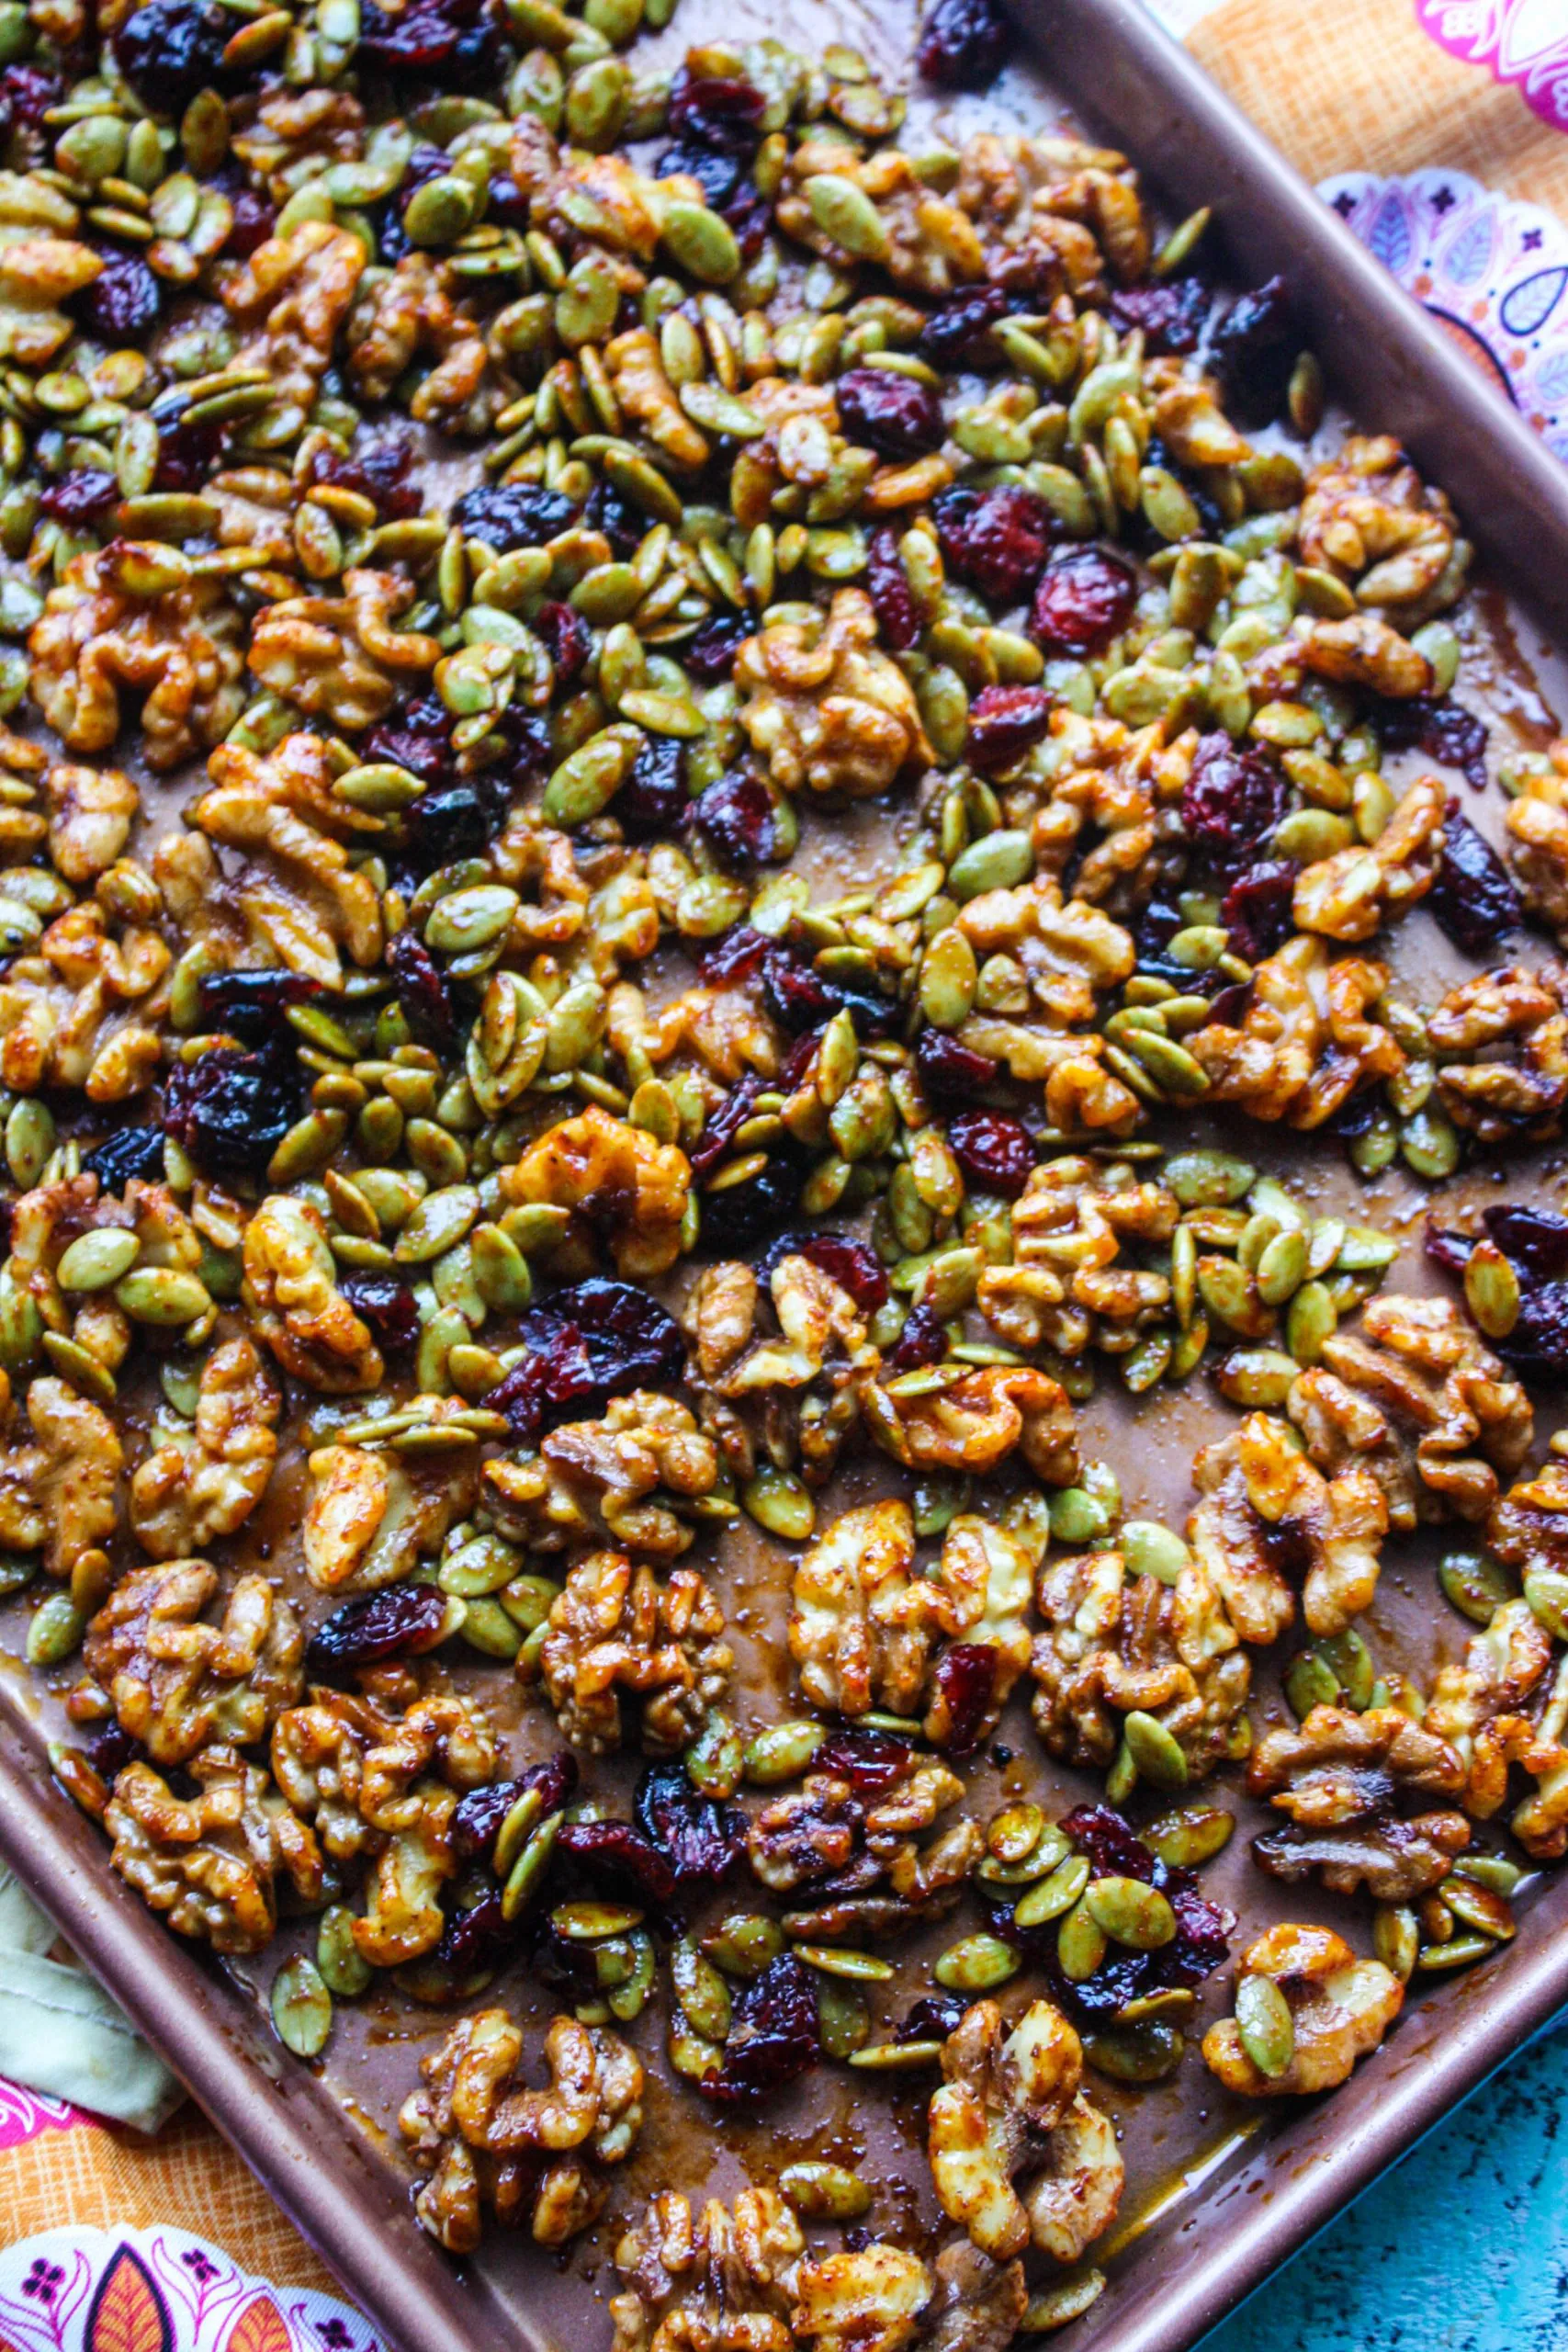 Sweet, Spicy & Citrus Roasted Walnut Mix is a great snack for any time of day (or night)!